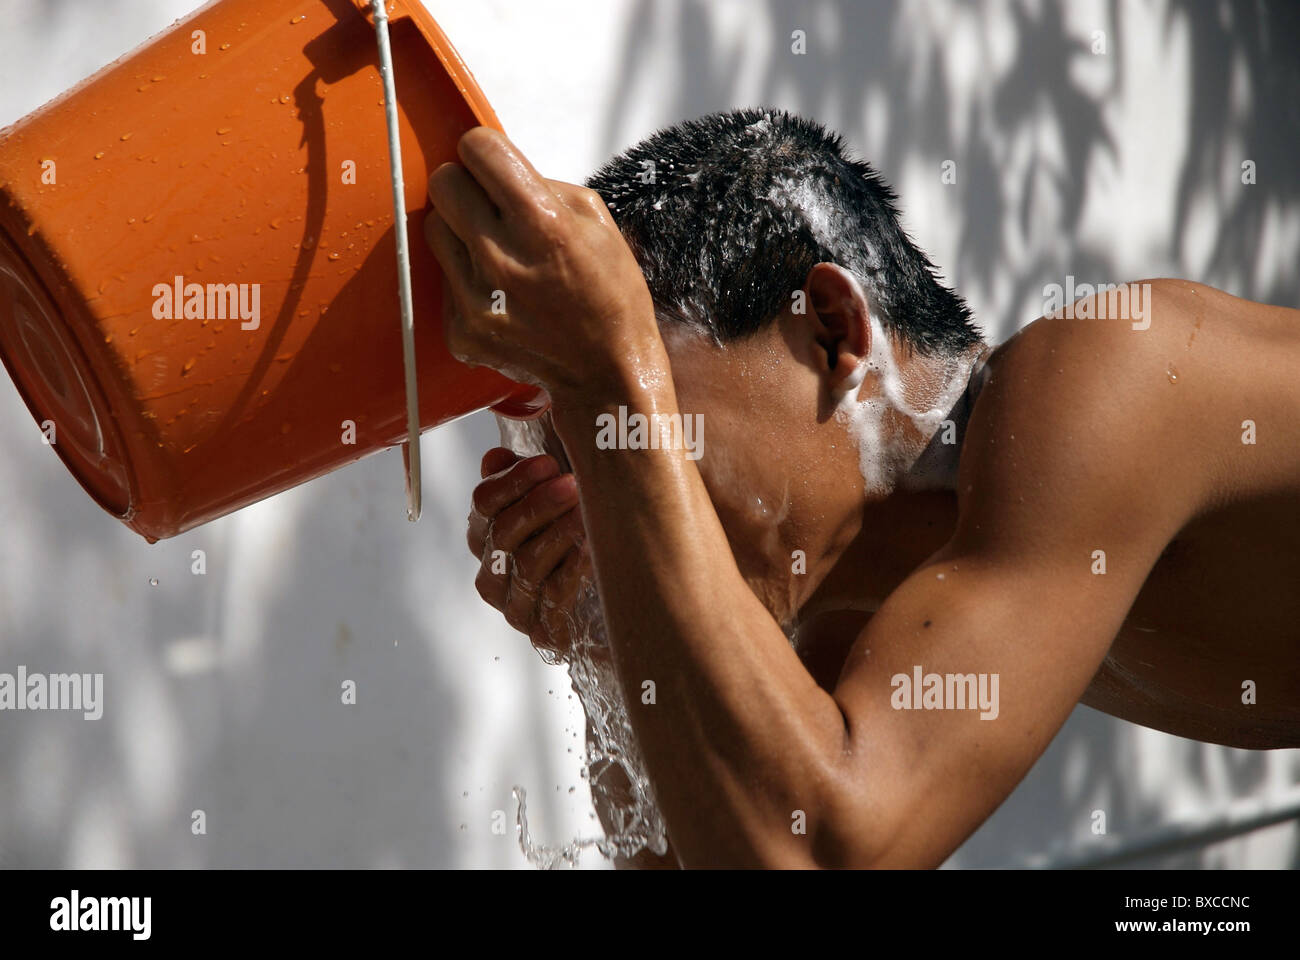 Luang Prabang is full of young monks, here is a head washed with a bucket of water Stock Photo